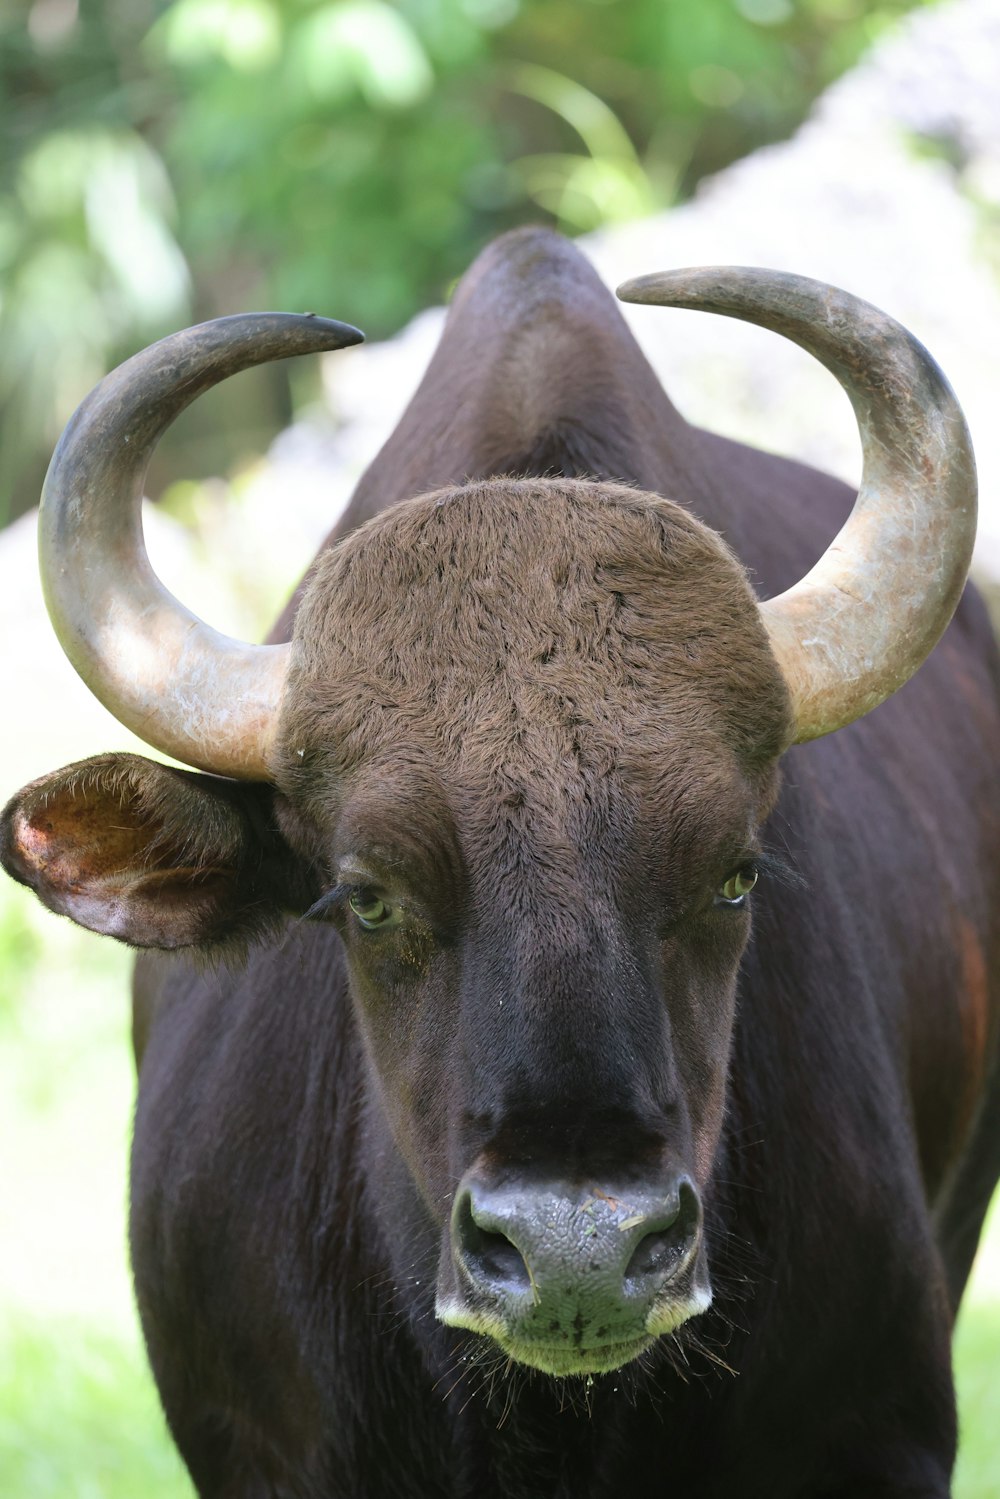 a bull with large horns standing in the grass